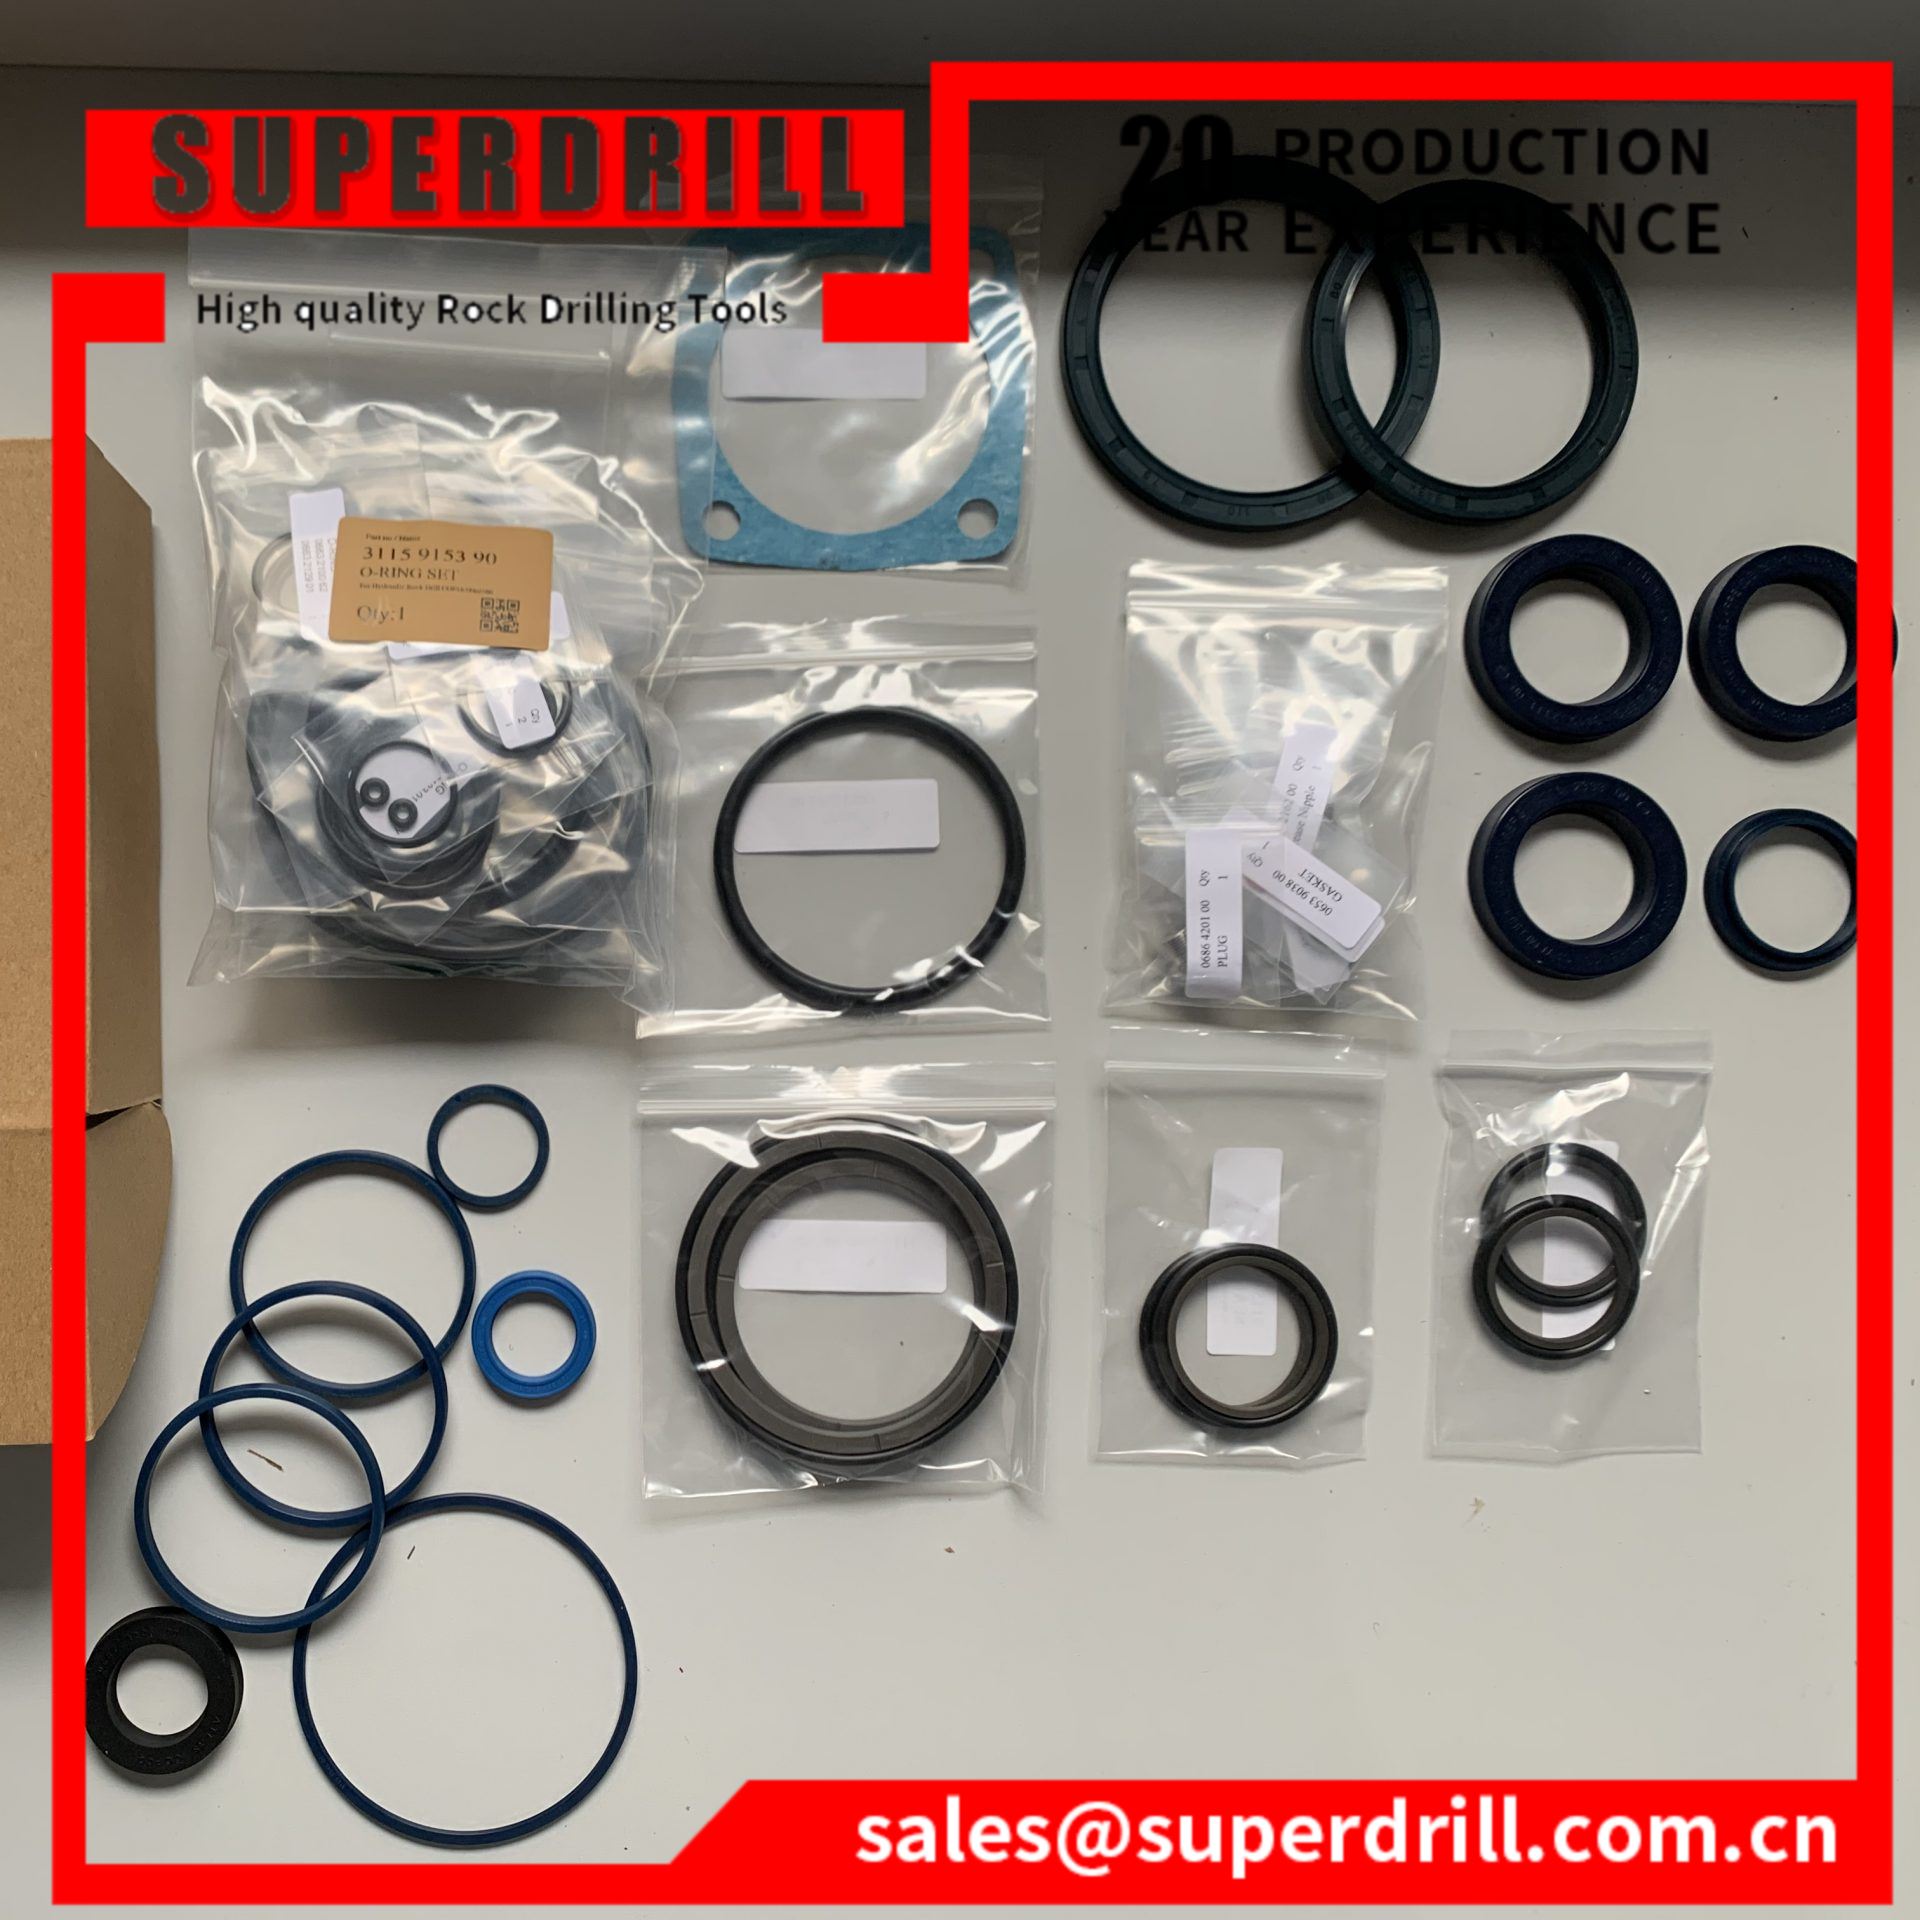 3115917096/sealing Package For Overhaul Of Rock Drill/cop2238+/drilling Rig Parts